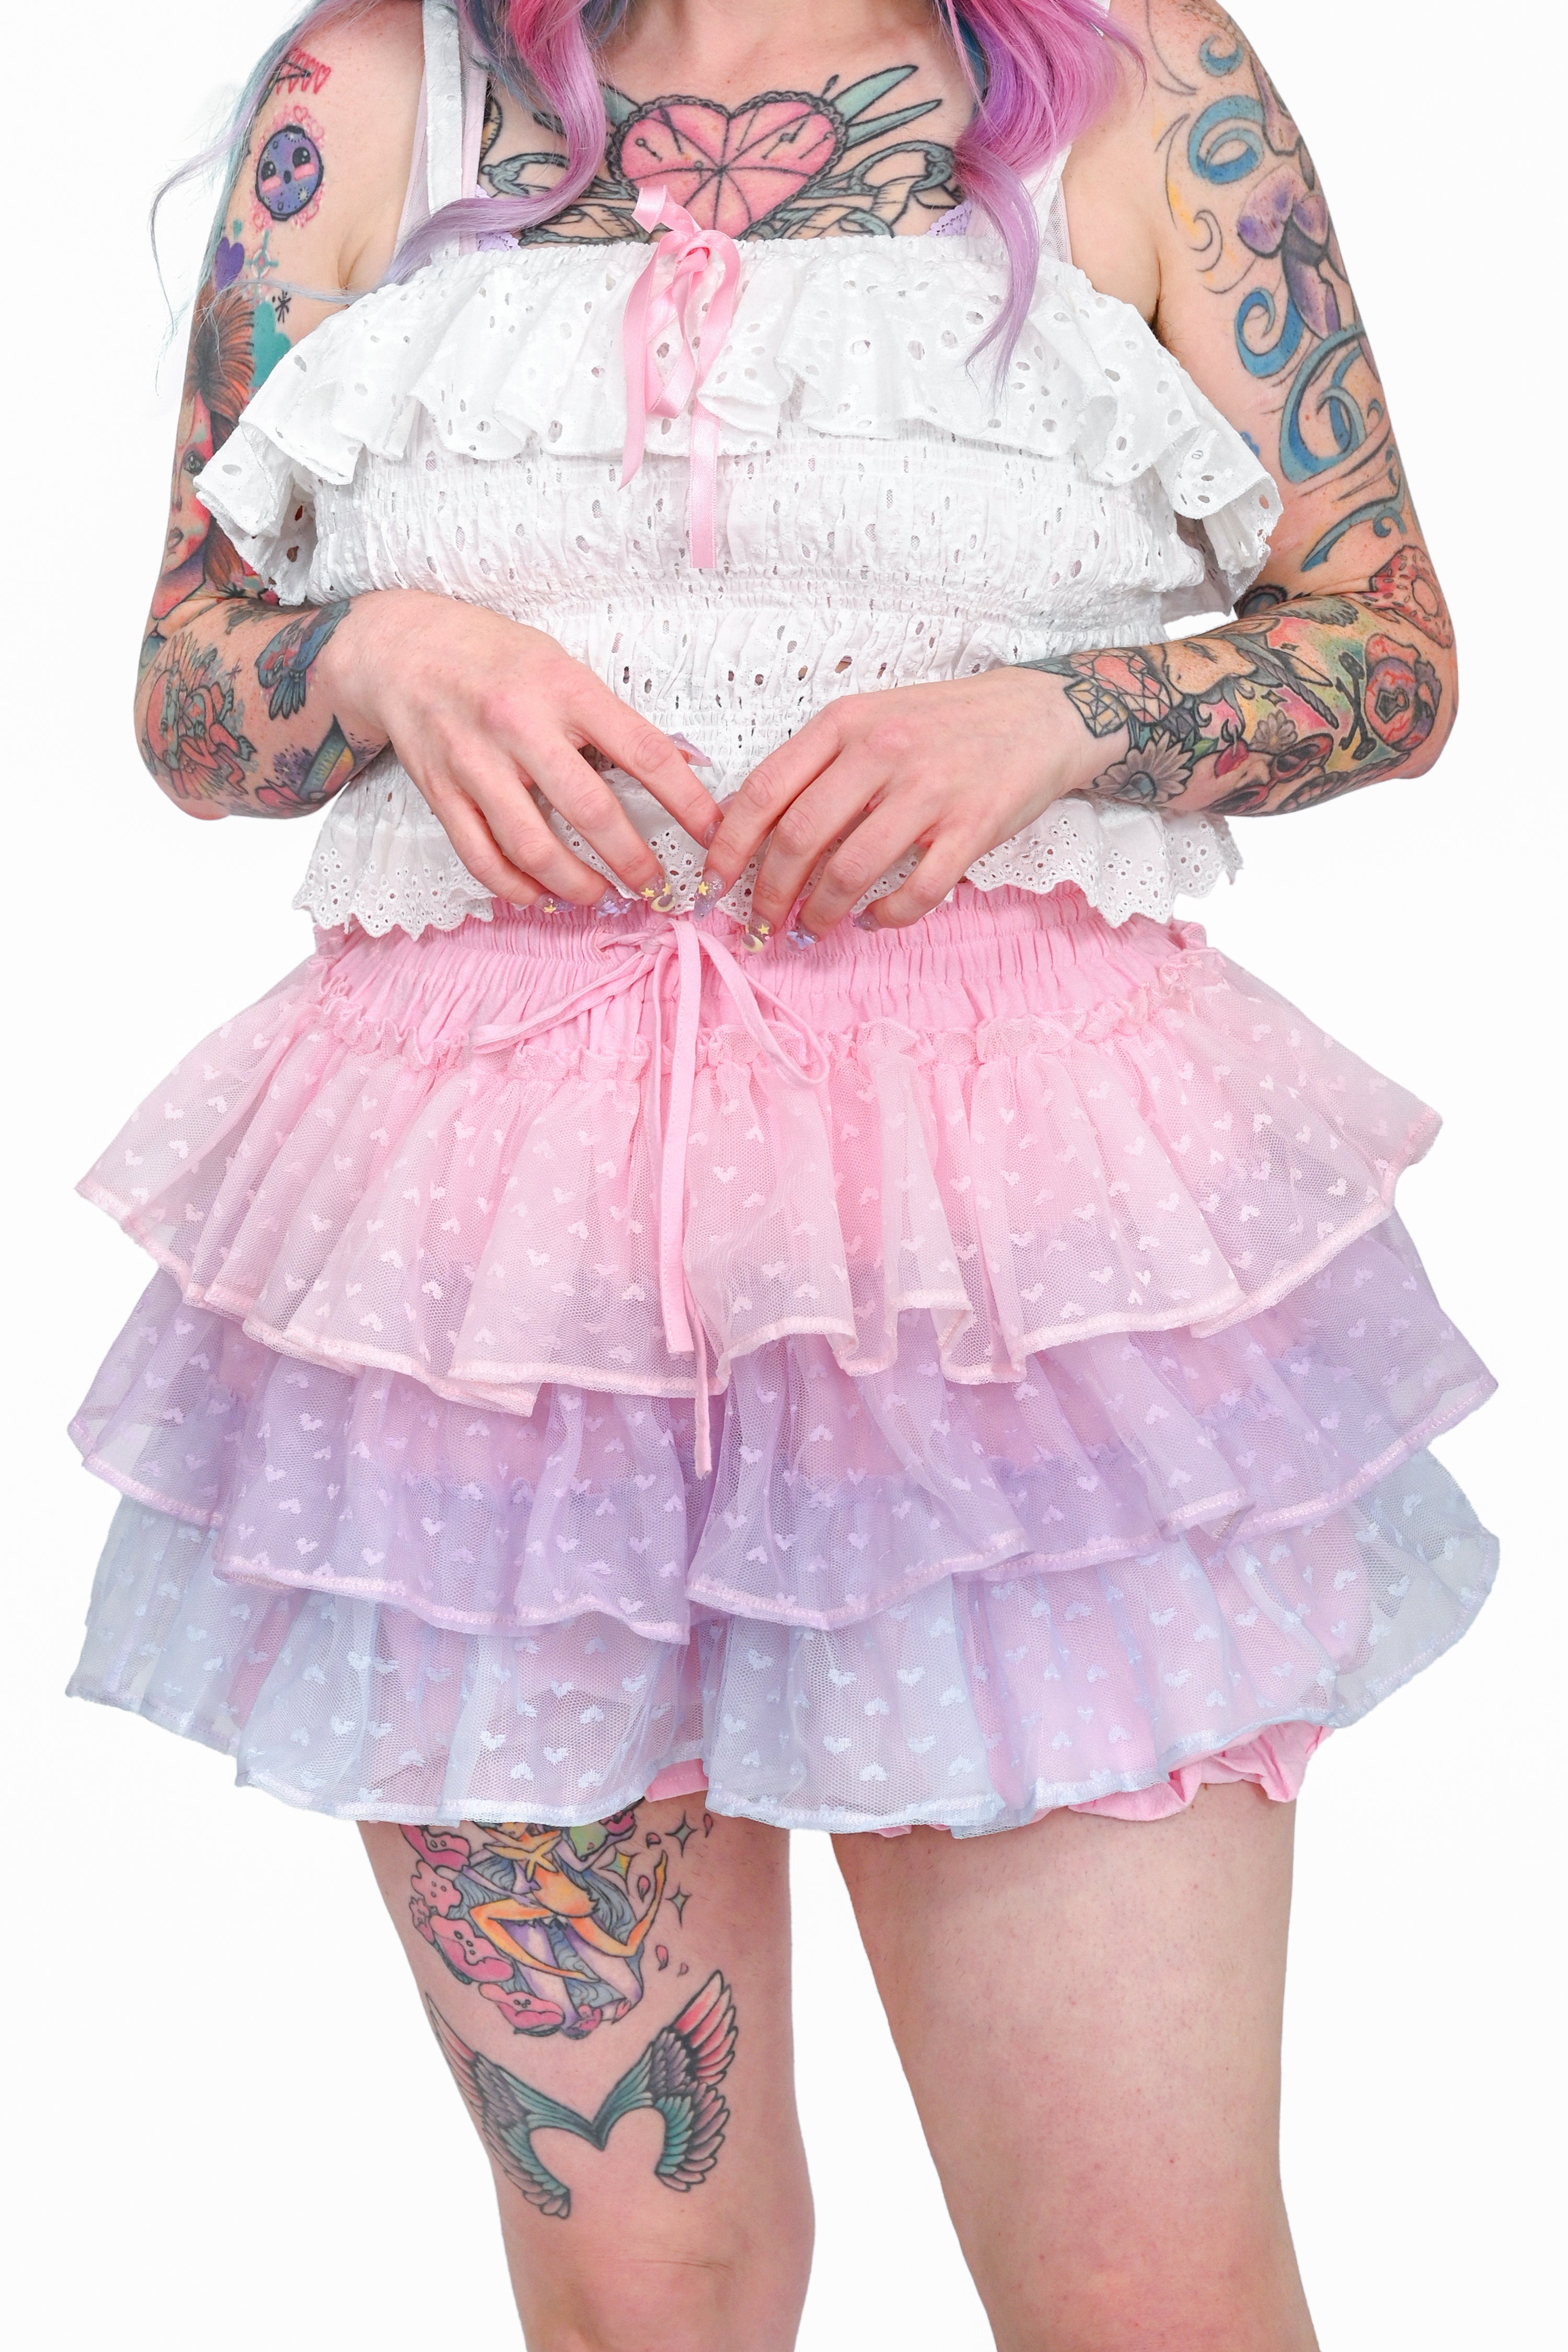 Cotton Candy Ruffle Skort - XS/S left! - Sign Up For Restock Notifications!